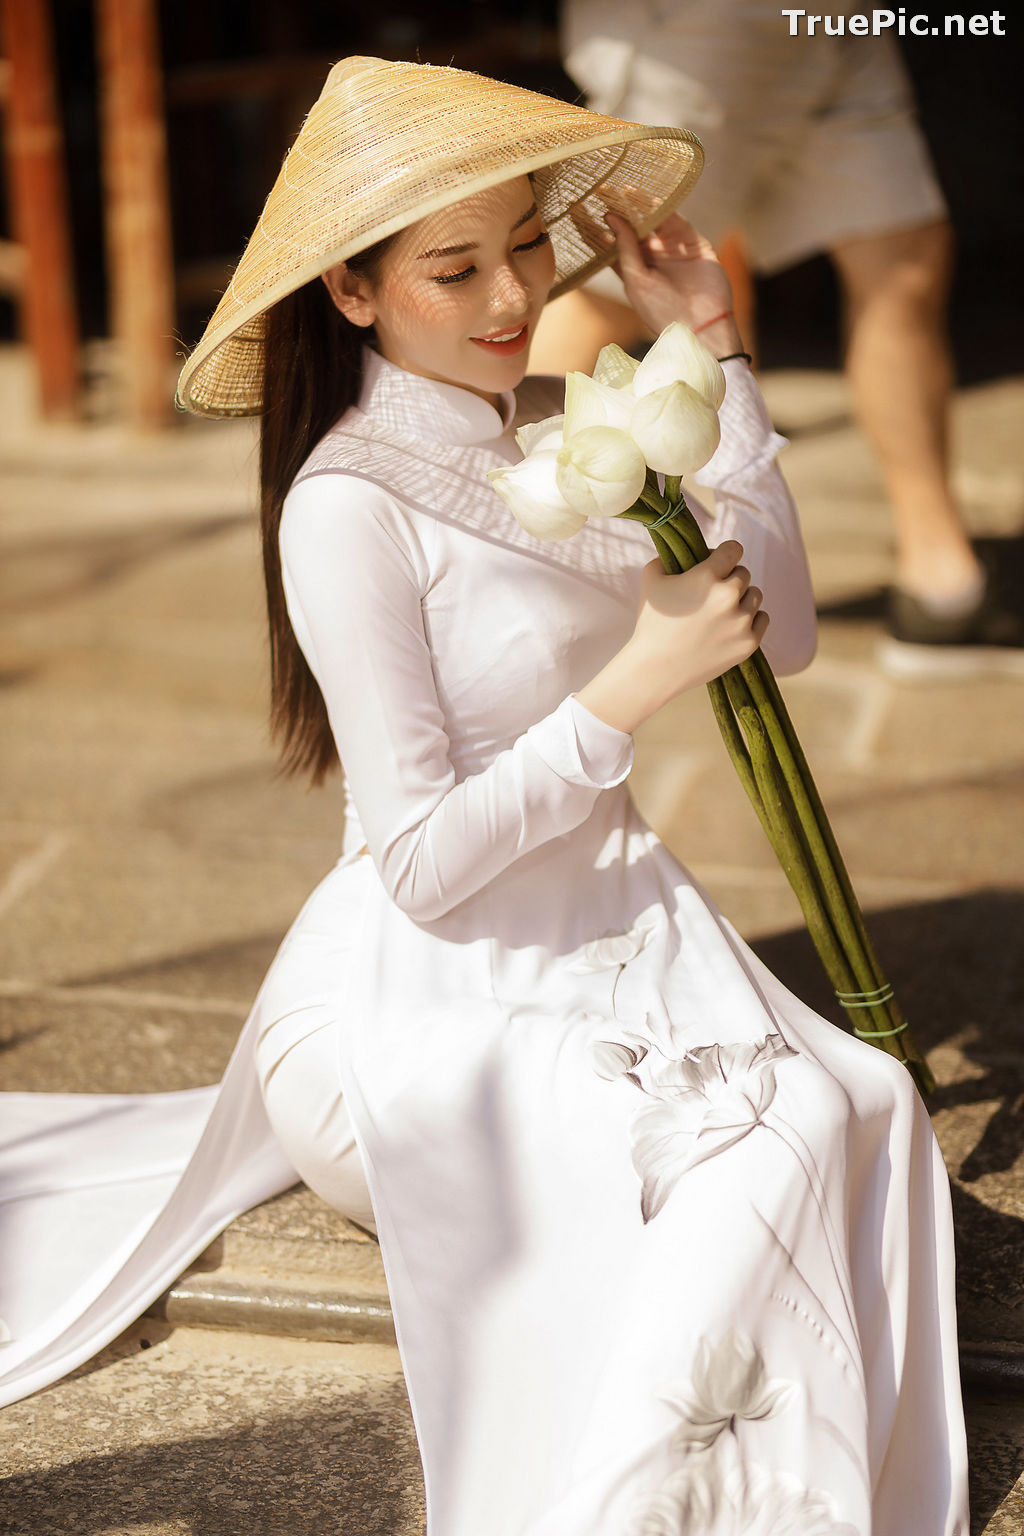 The Beauty of Vietnamese Girls with Traditional Dress (Ao Dai) #2